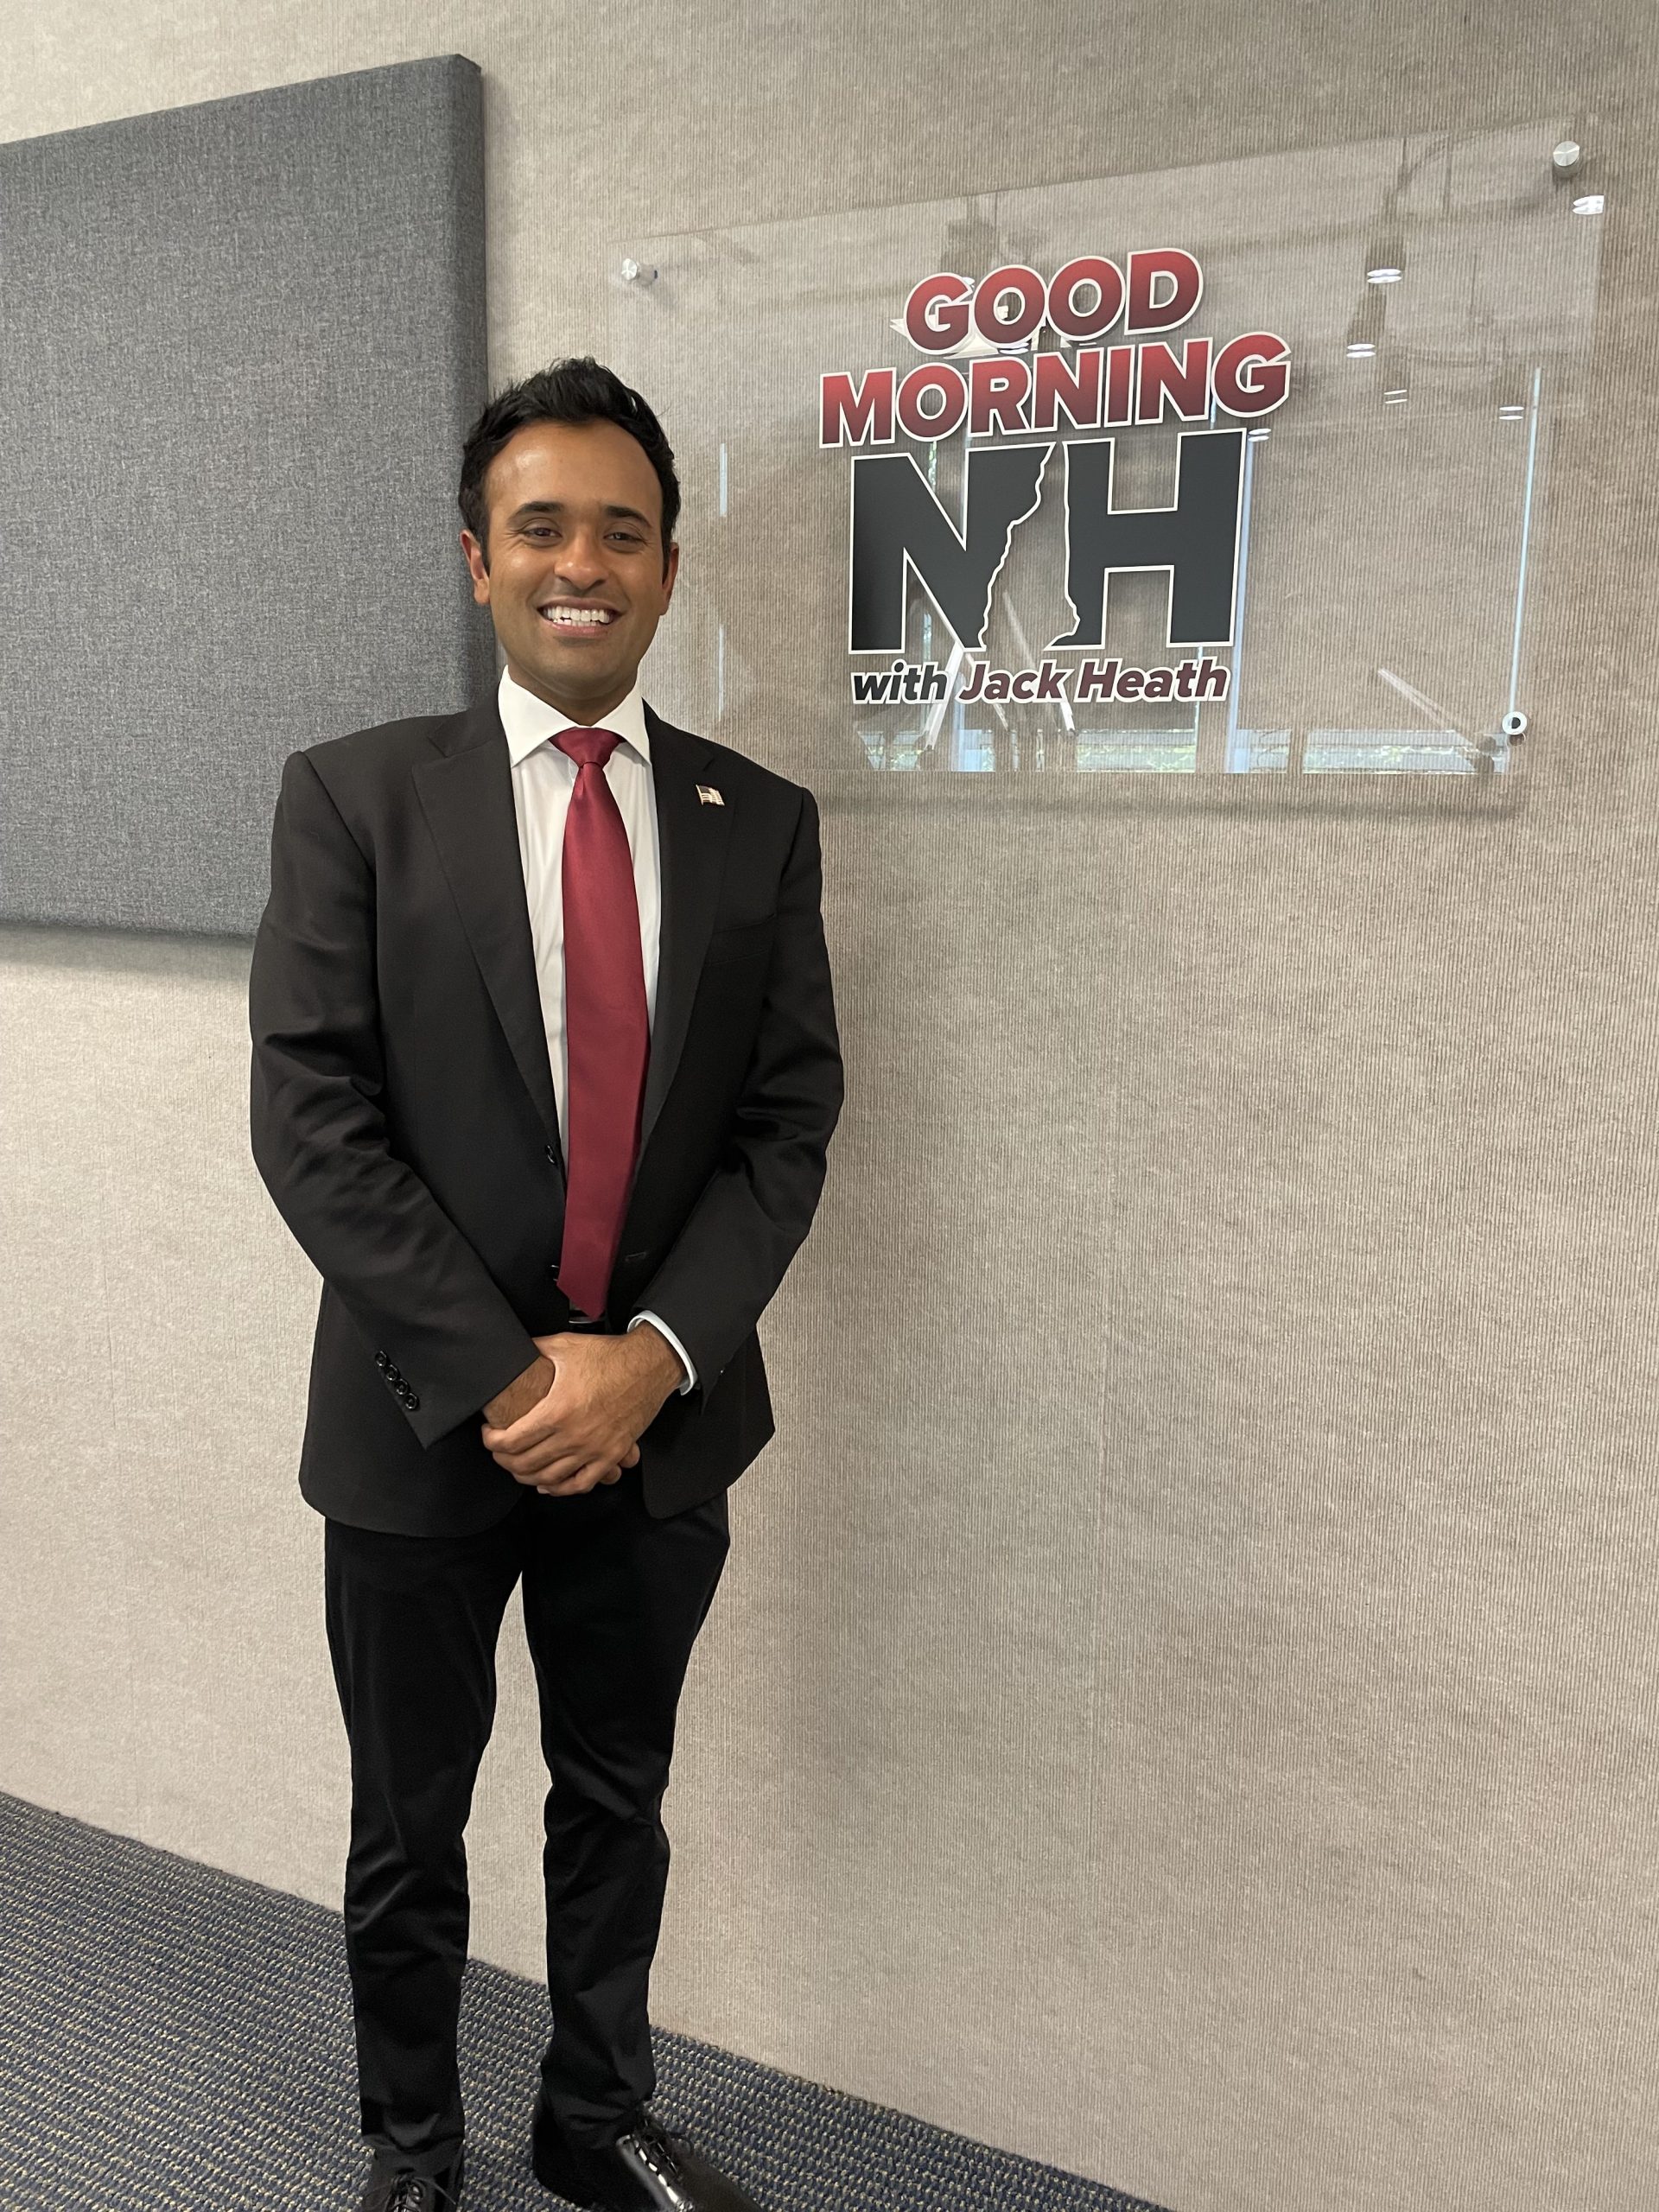 Vivek Ramaswamy in New Hampshire this Weekend